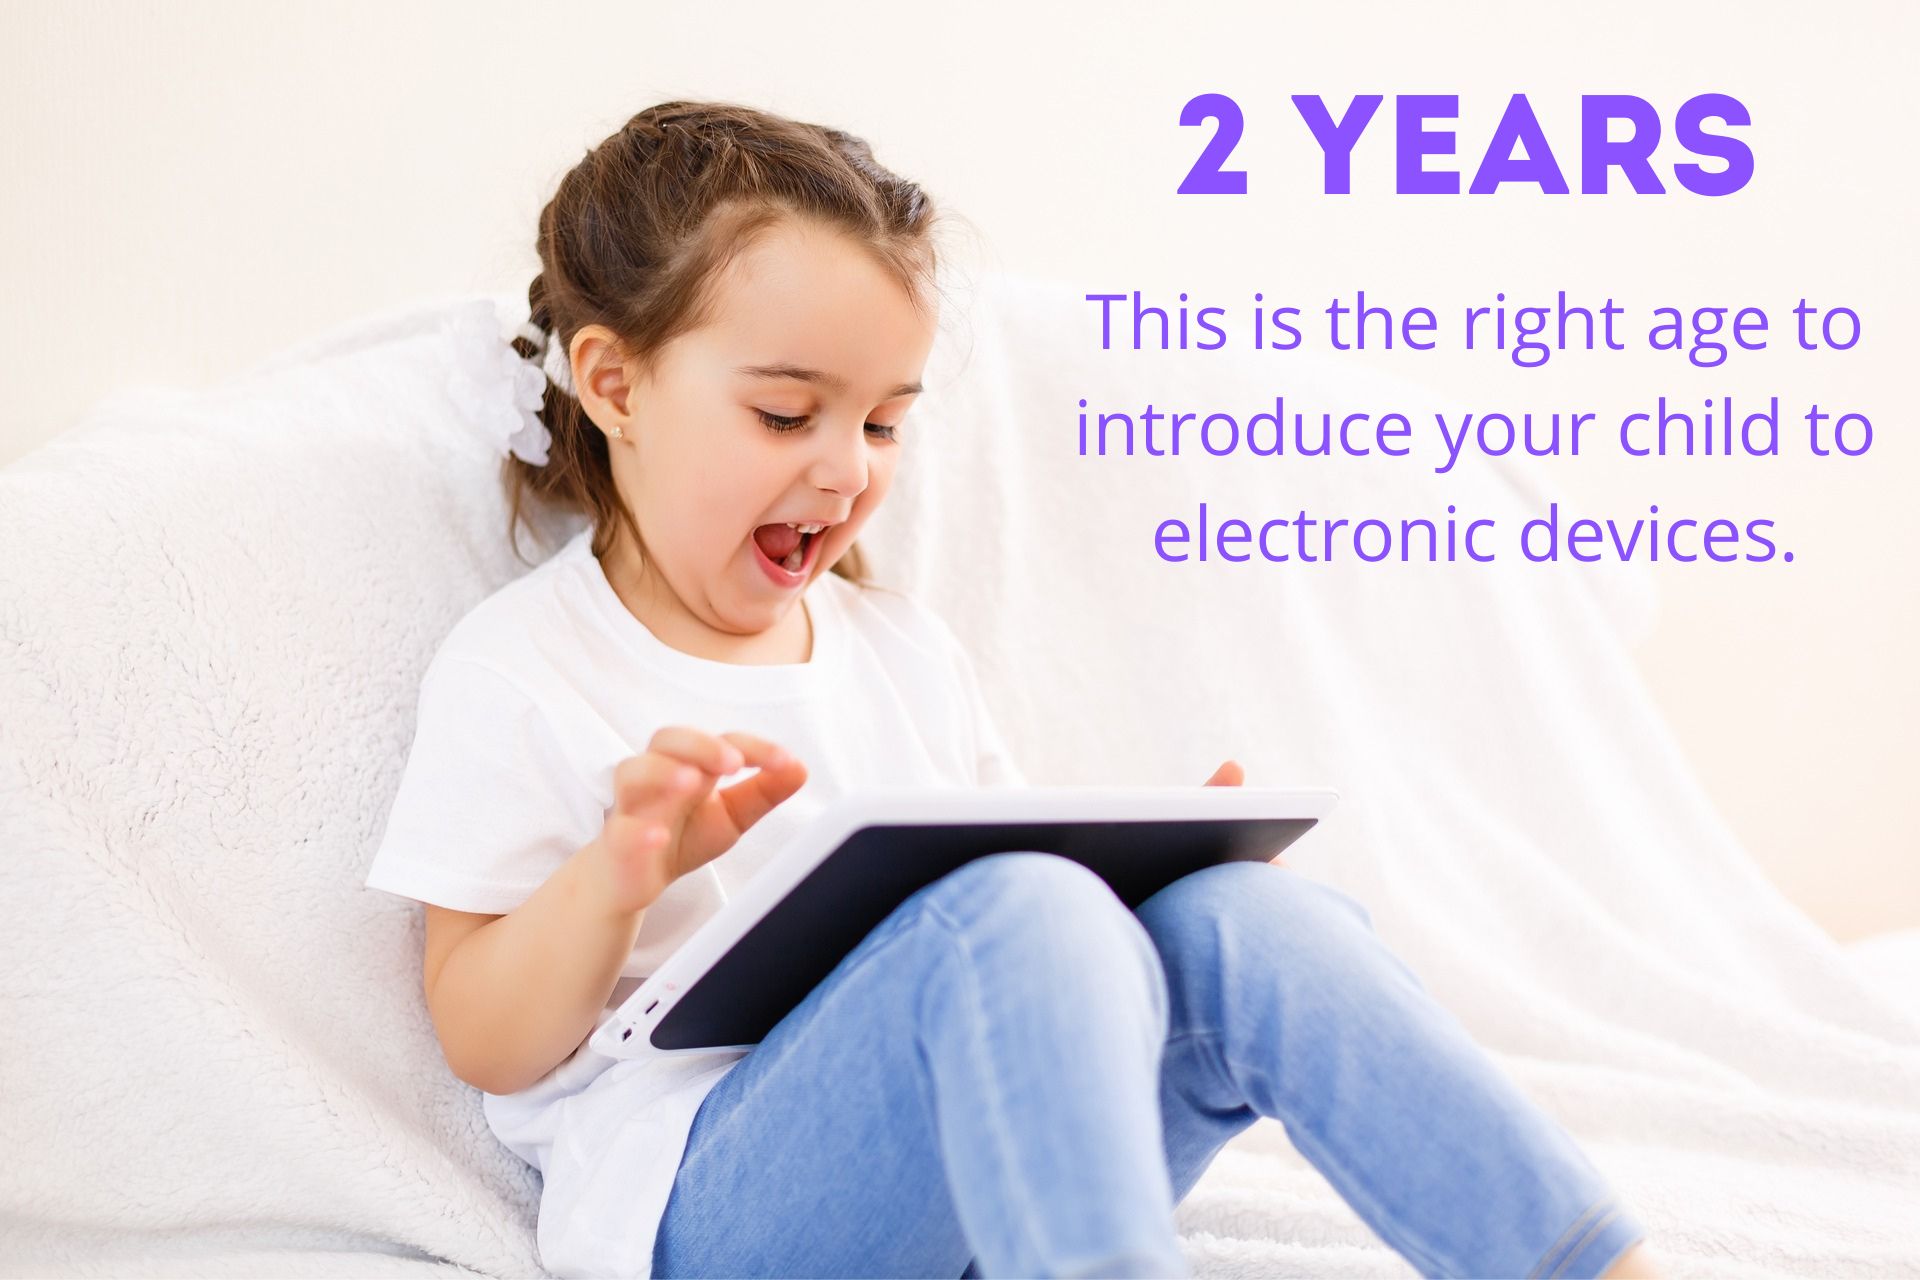 When can you give your child a tablet or smartphone